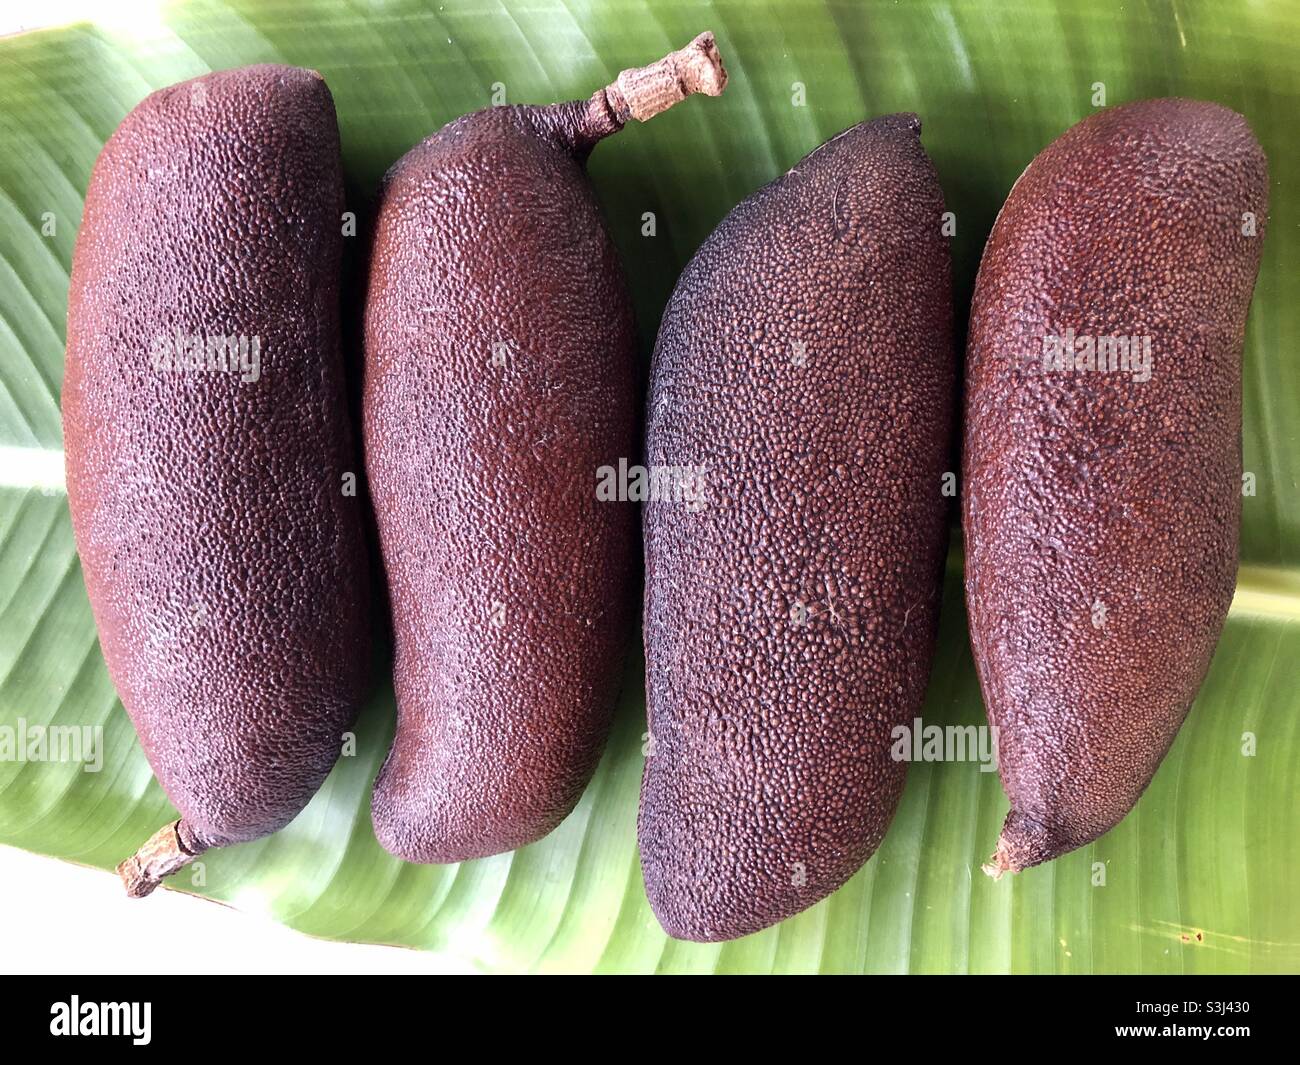 Fruit of the Jatobá tree, Hymenaea courbaril, under a banana leaf background. This fruit is widely used in folk medicine and the wood from this tree is one of most valuable Stock Photo